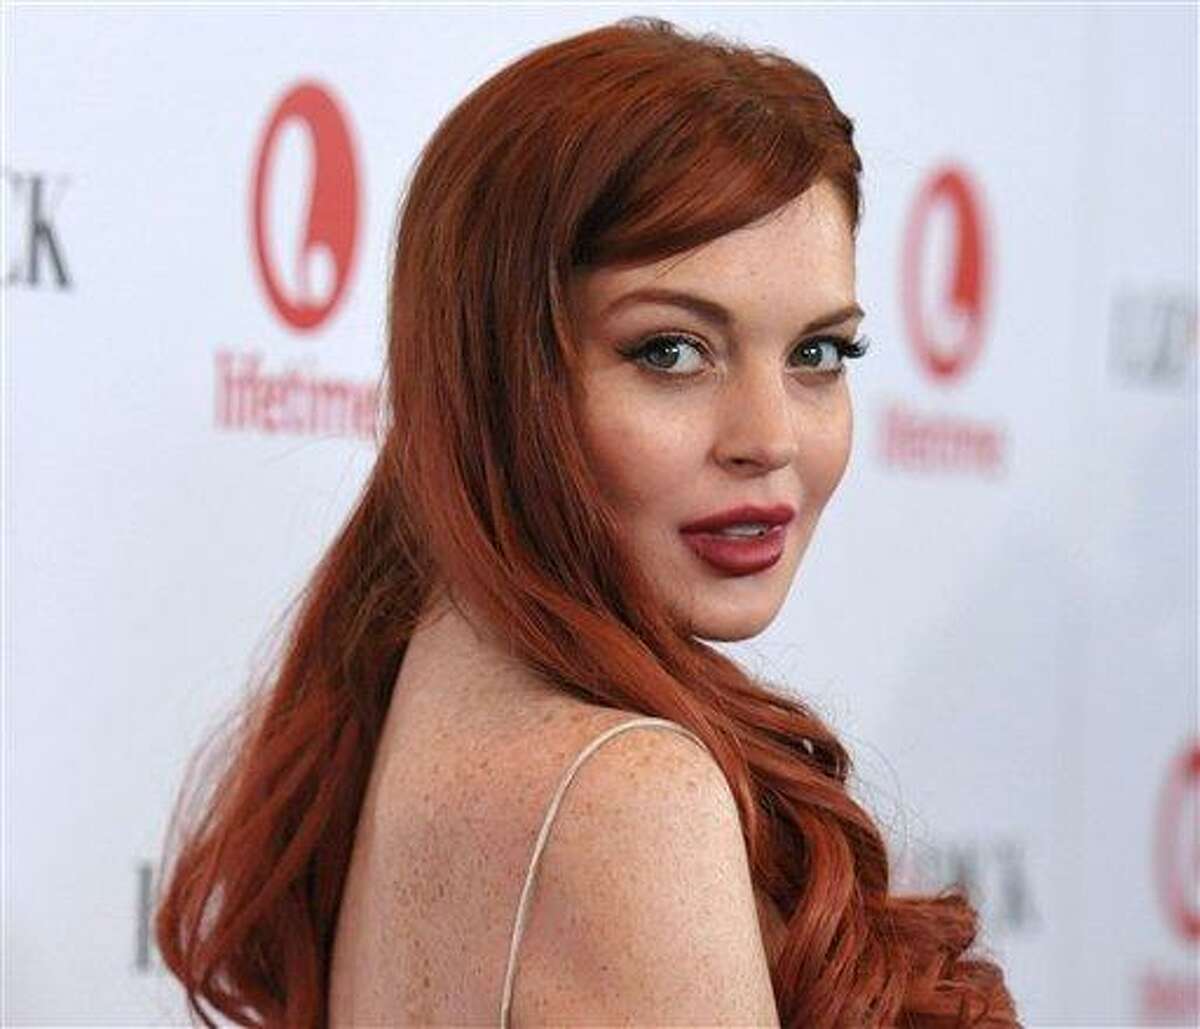 Lindsay Lohan attends a dinner celebrating the premiere of "Liz & Dick" at the Beverly Hills Hotel in Beverly Hills, Calif. Lohan is under arrest and charged with third-degree assault after police say she hit a woman during an argument at a New York City nightclub. Photo by John Shearer/Invision/AP